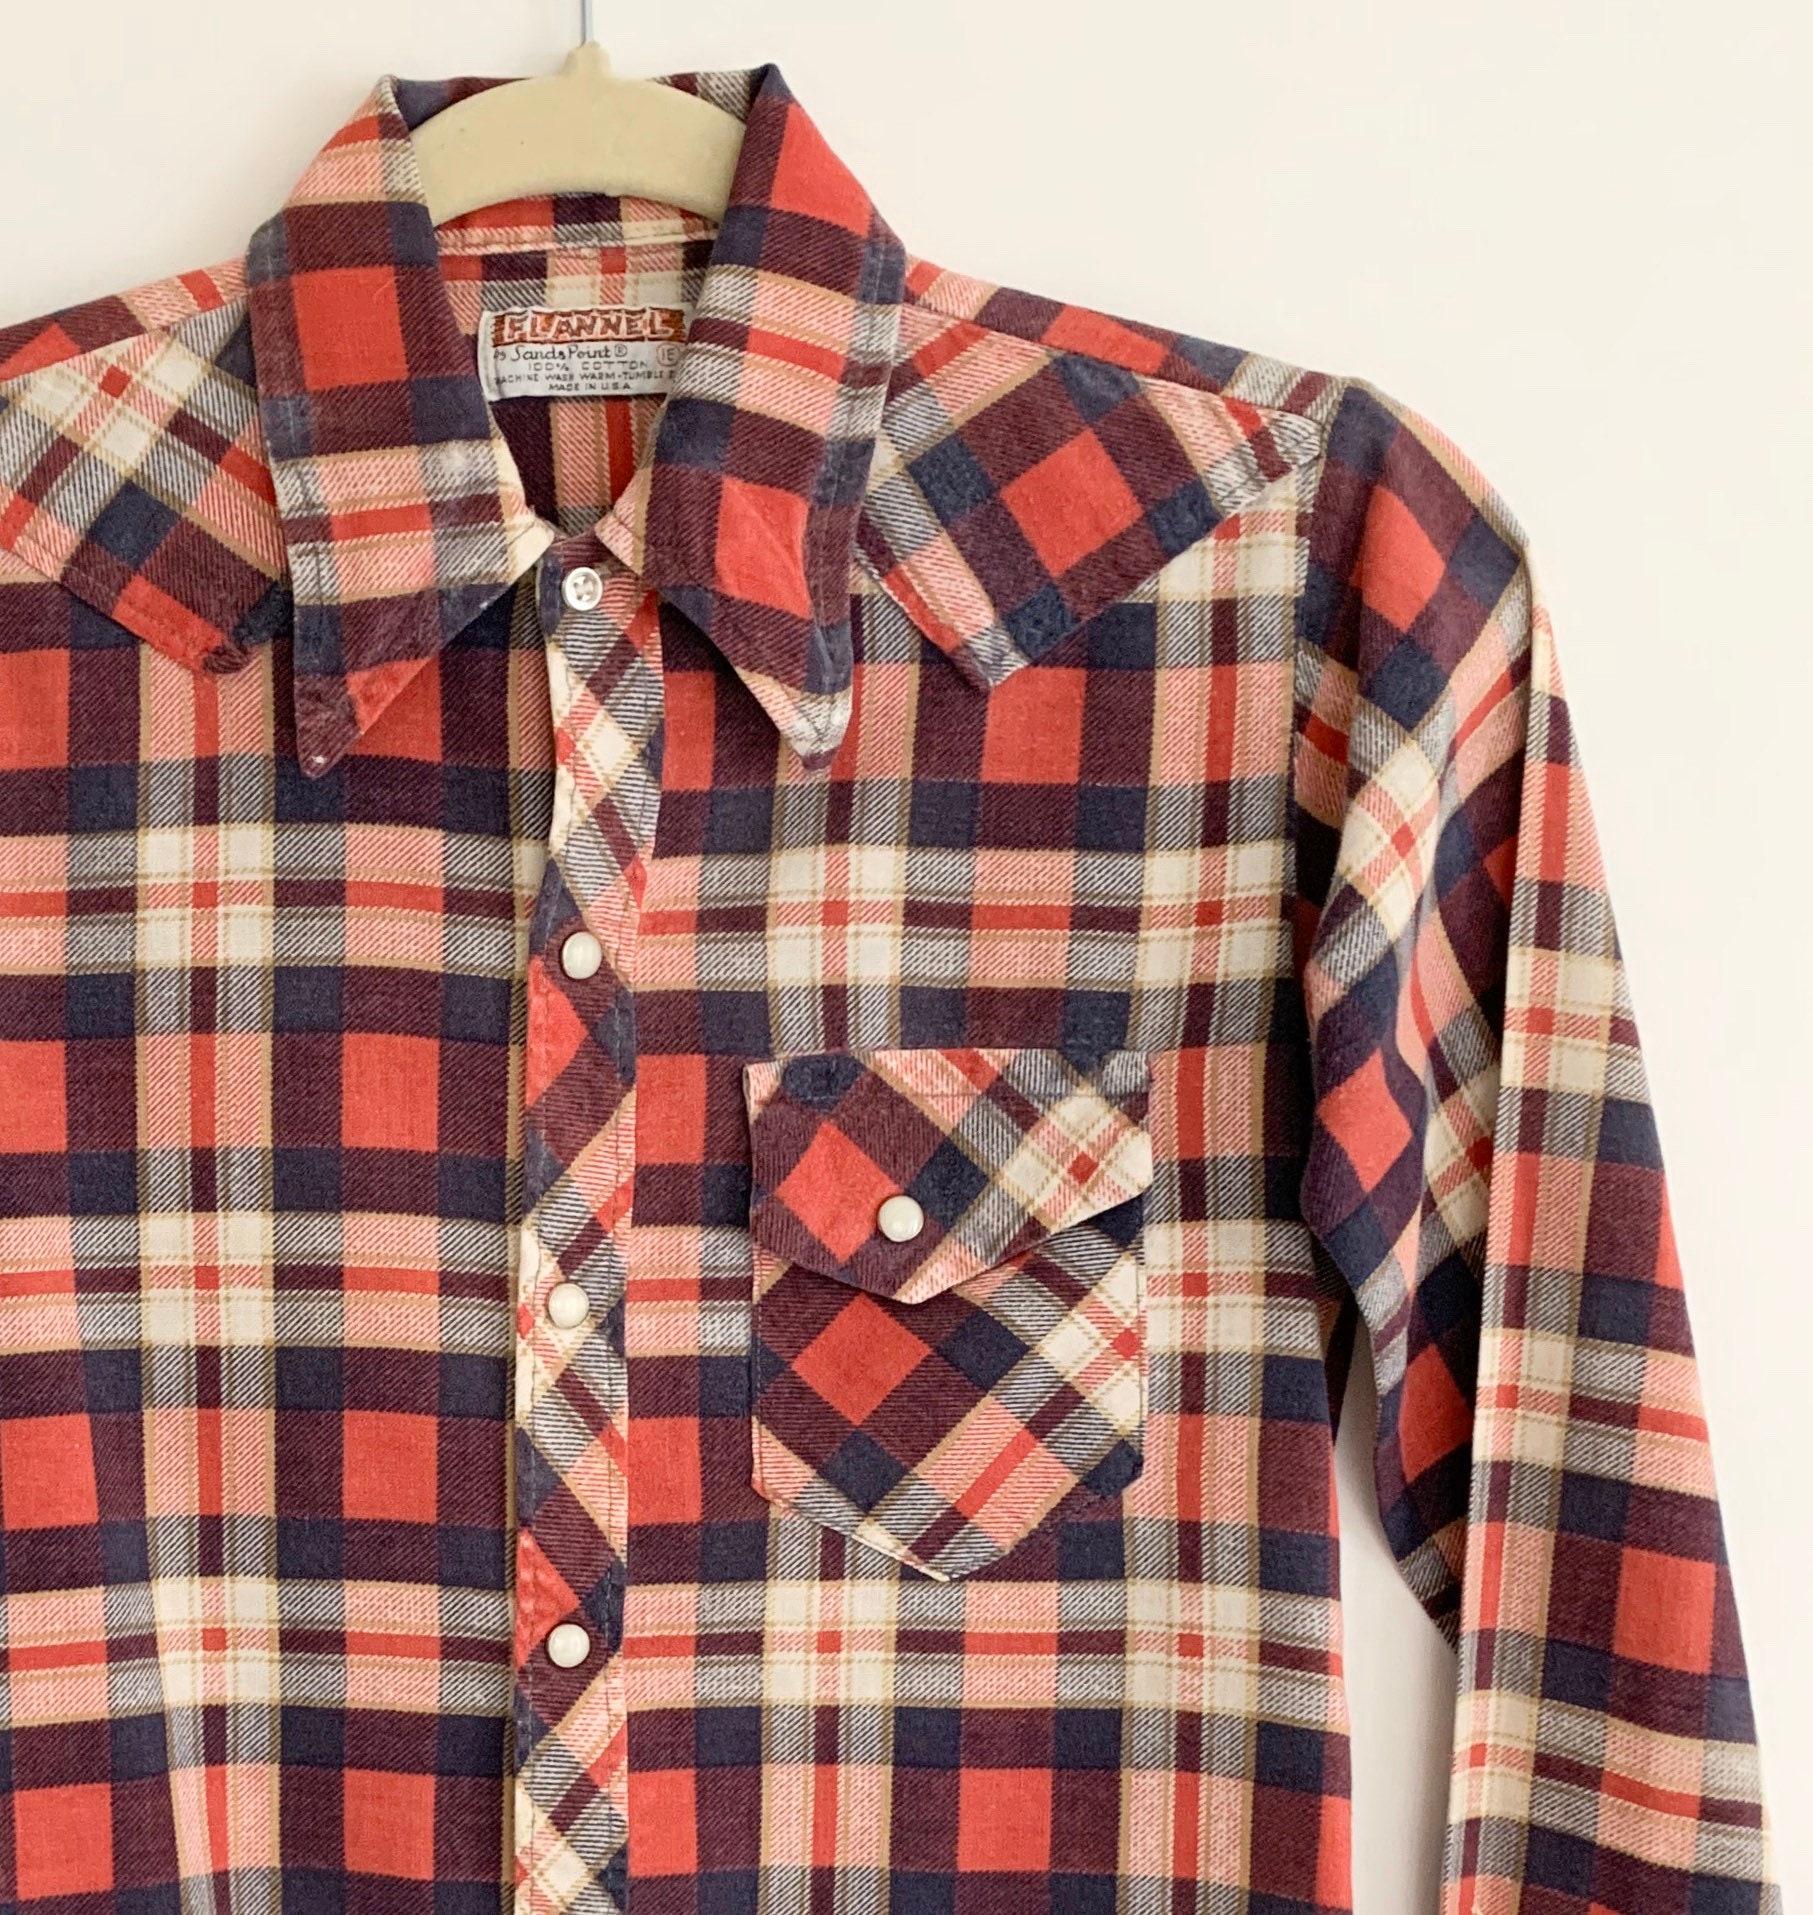 Boys Western Flannel Shirt Vintage Flannel by Sand Point Pearl Snap ...